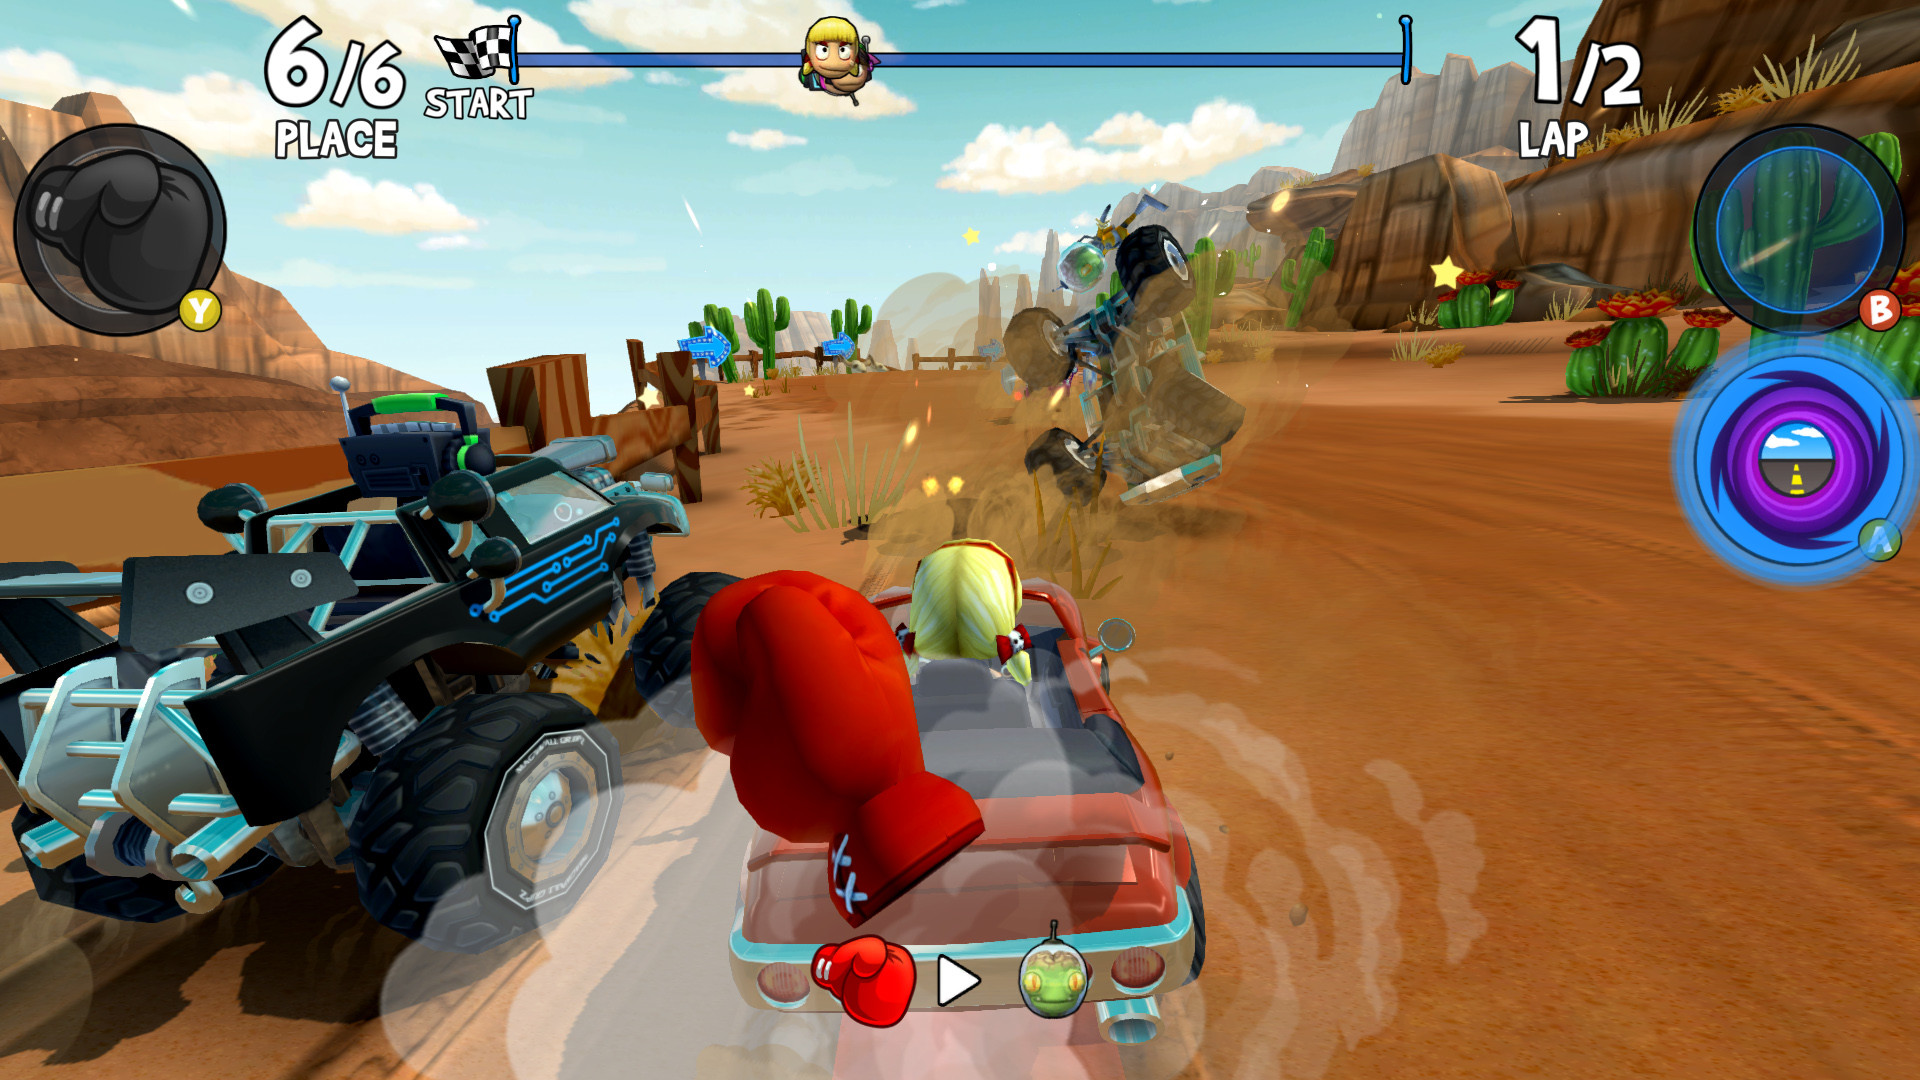 beach buggy racing for pc